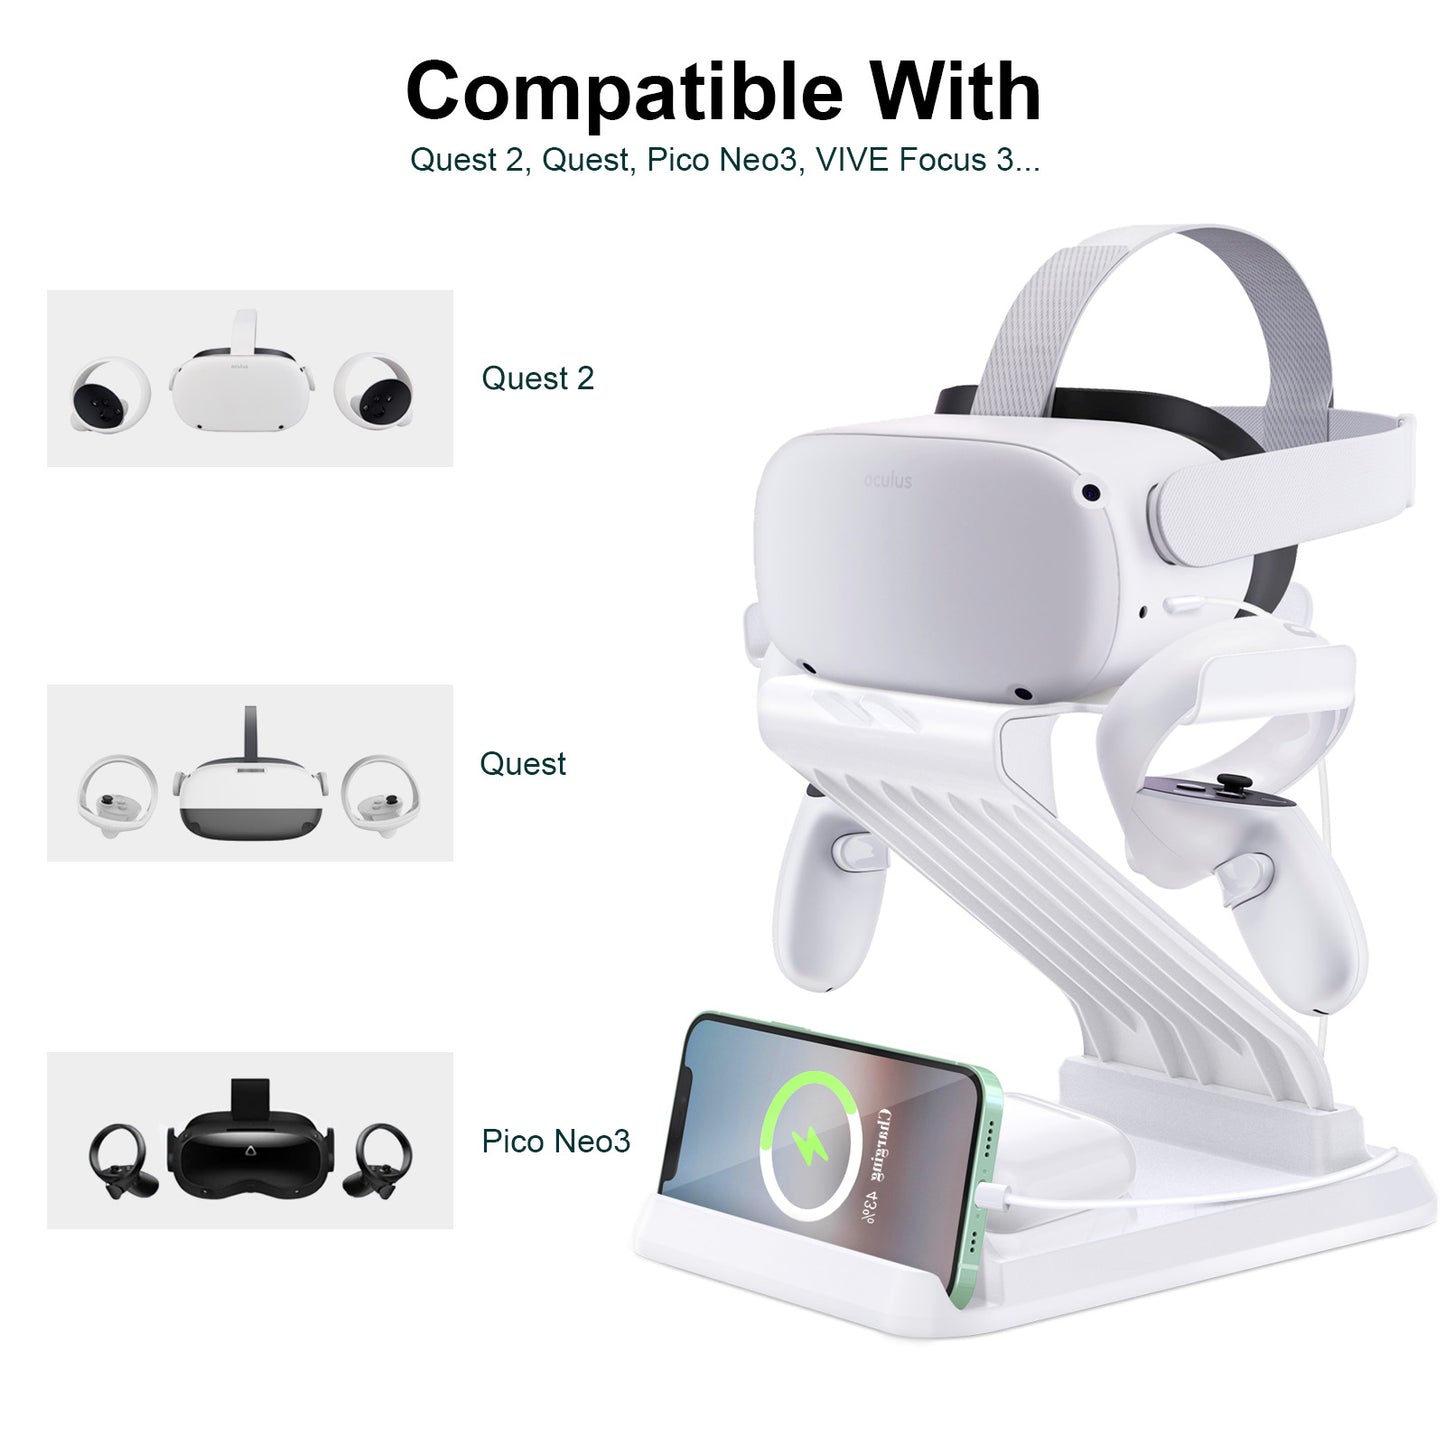 [ship from the US]VR Stand with Charging Port,Compatible with Oculus Quest 2/Quest /Pico Neo 3/Vive Focus 3 VR Headset and Touch Controllers